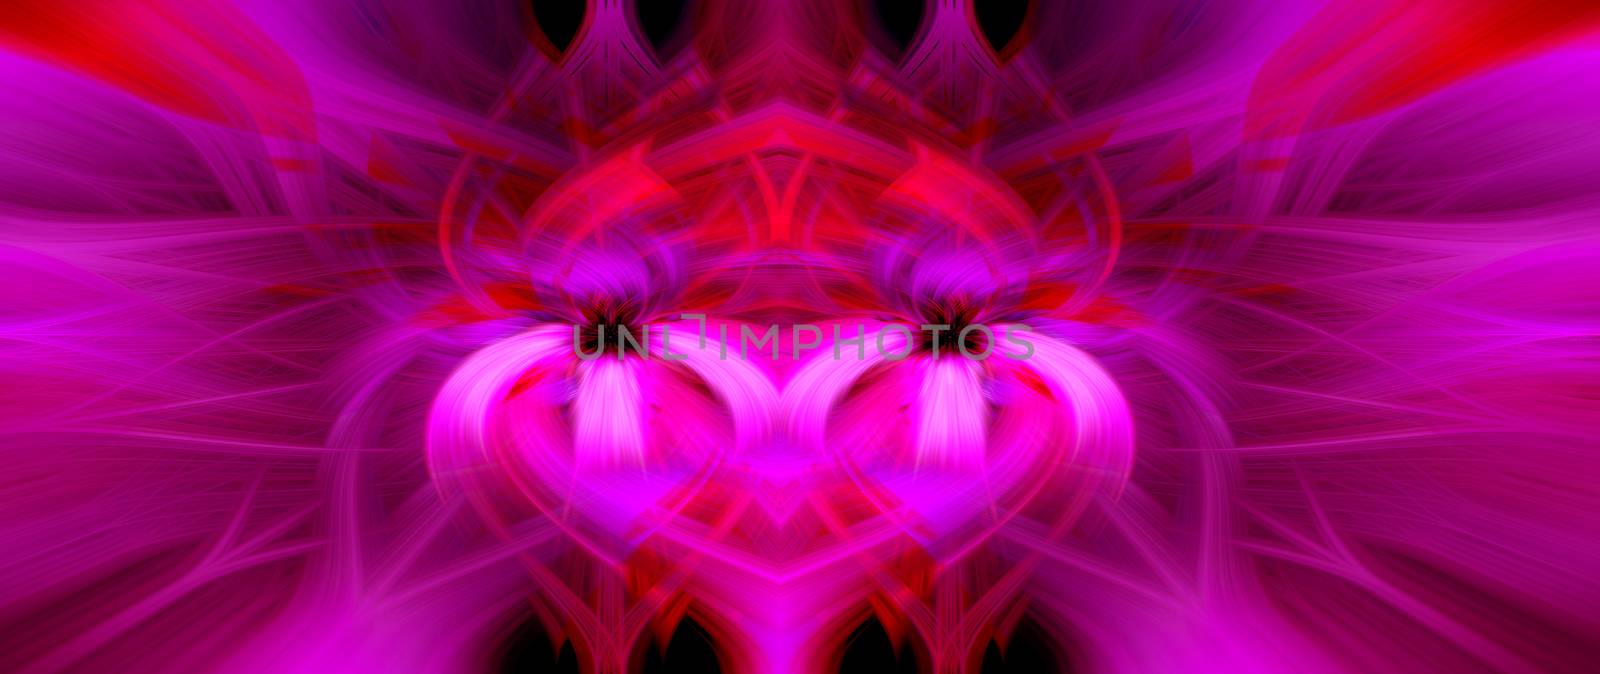 Beautiful abstract intertwined 3d fibers forming a shape of sparkle, flame, flower, interlinked hearts. Pink, purple, maroon and red colors. Illustration. Banner and panorama size. by DamantisZ